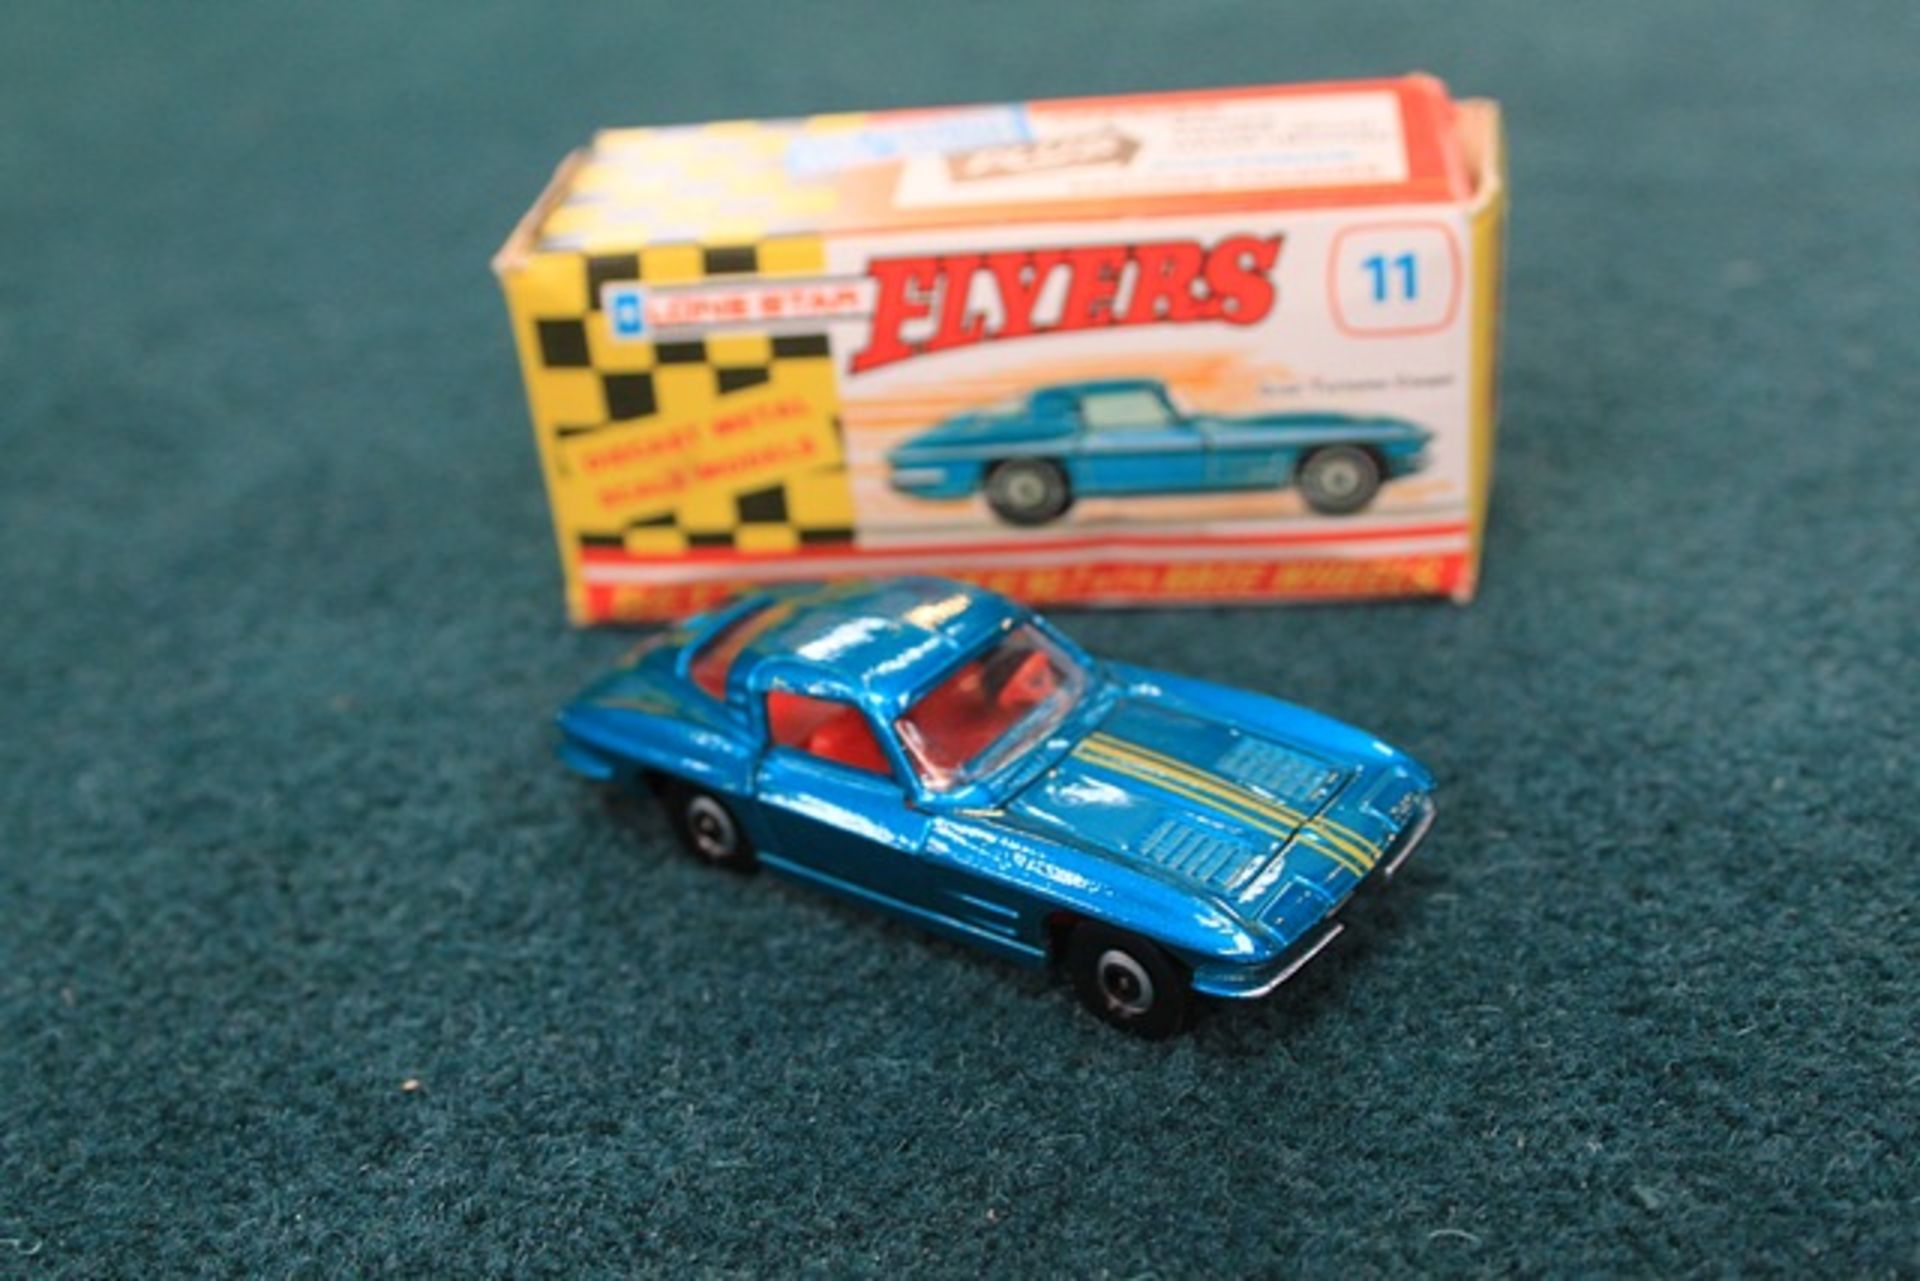 Lone Star Flyers Diecast # 11 Grand Turismo Coupe In Turquoise With Red Interior Complete With Box - Image 2 of 2